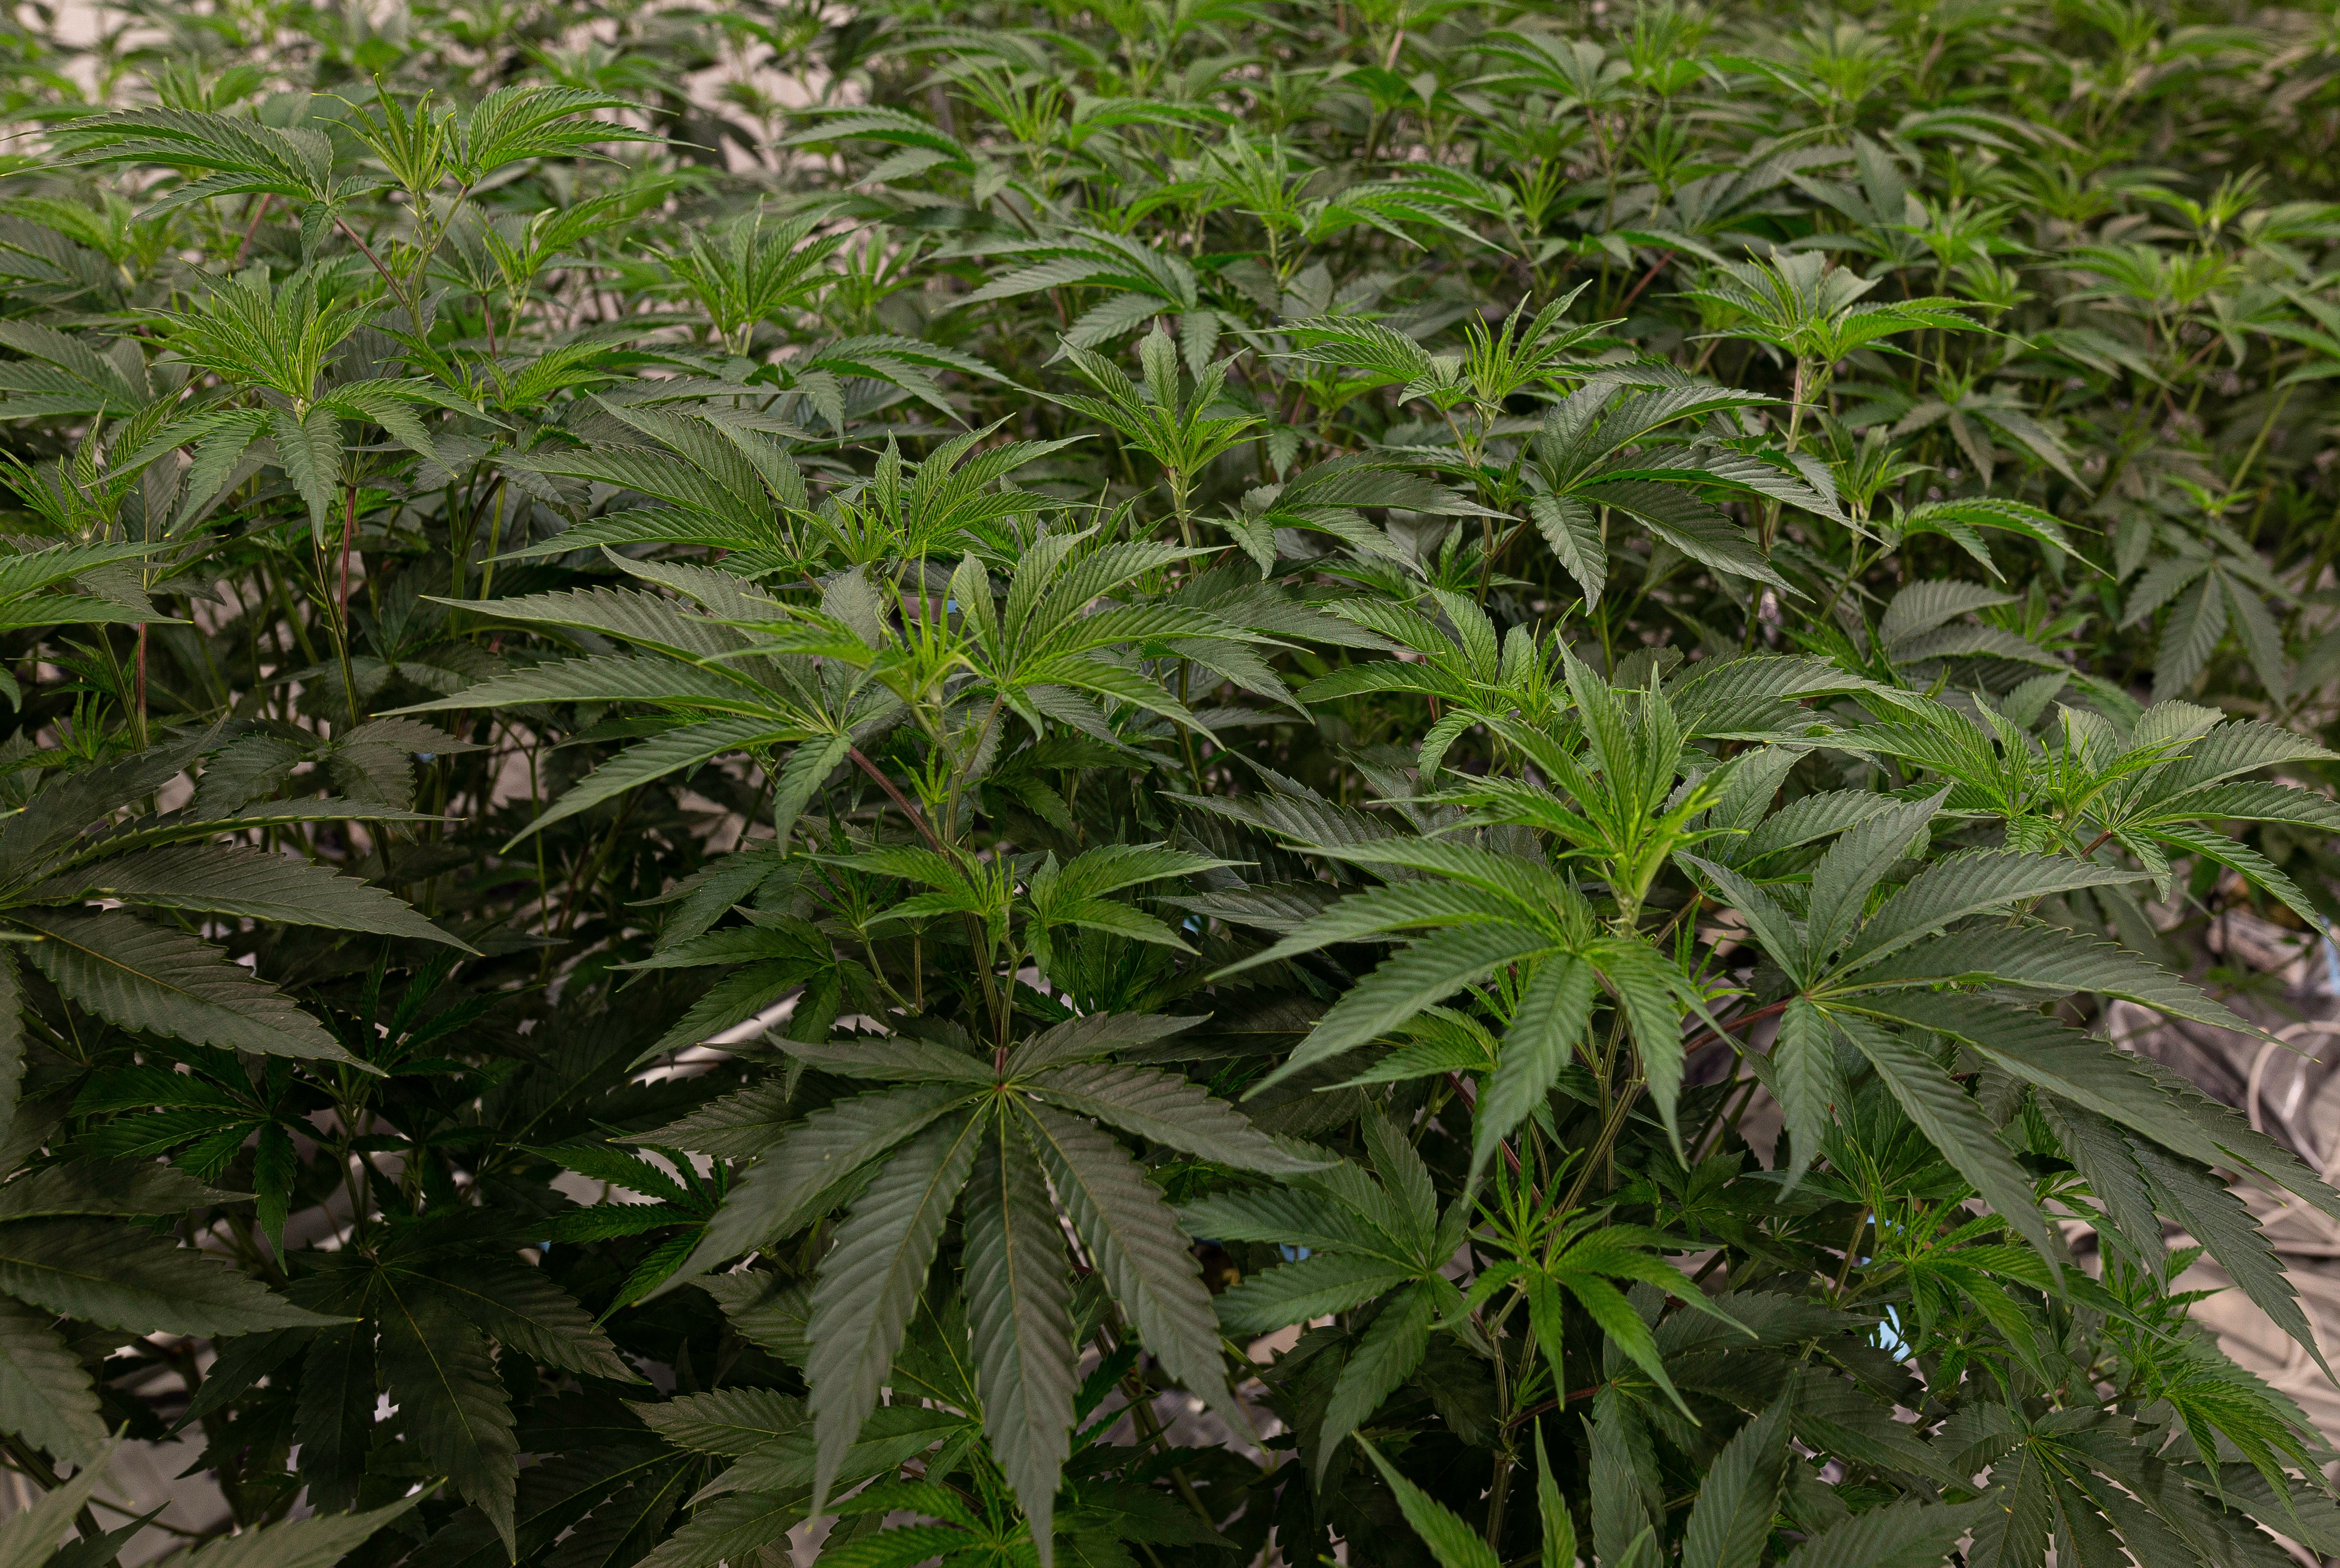 A group of cannabis plants of the Wedding Cake weed strain are grown together in a commercial grow room.